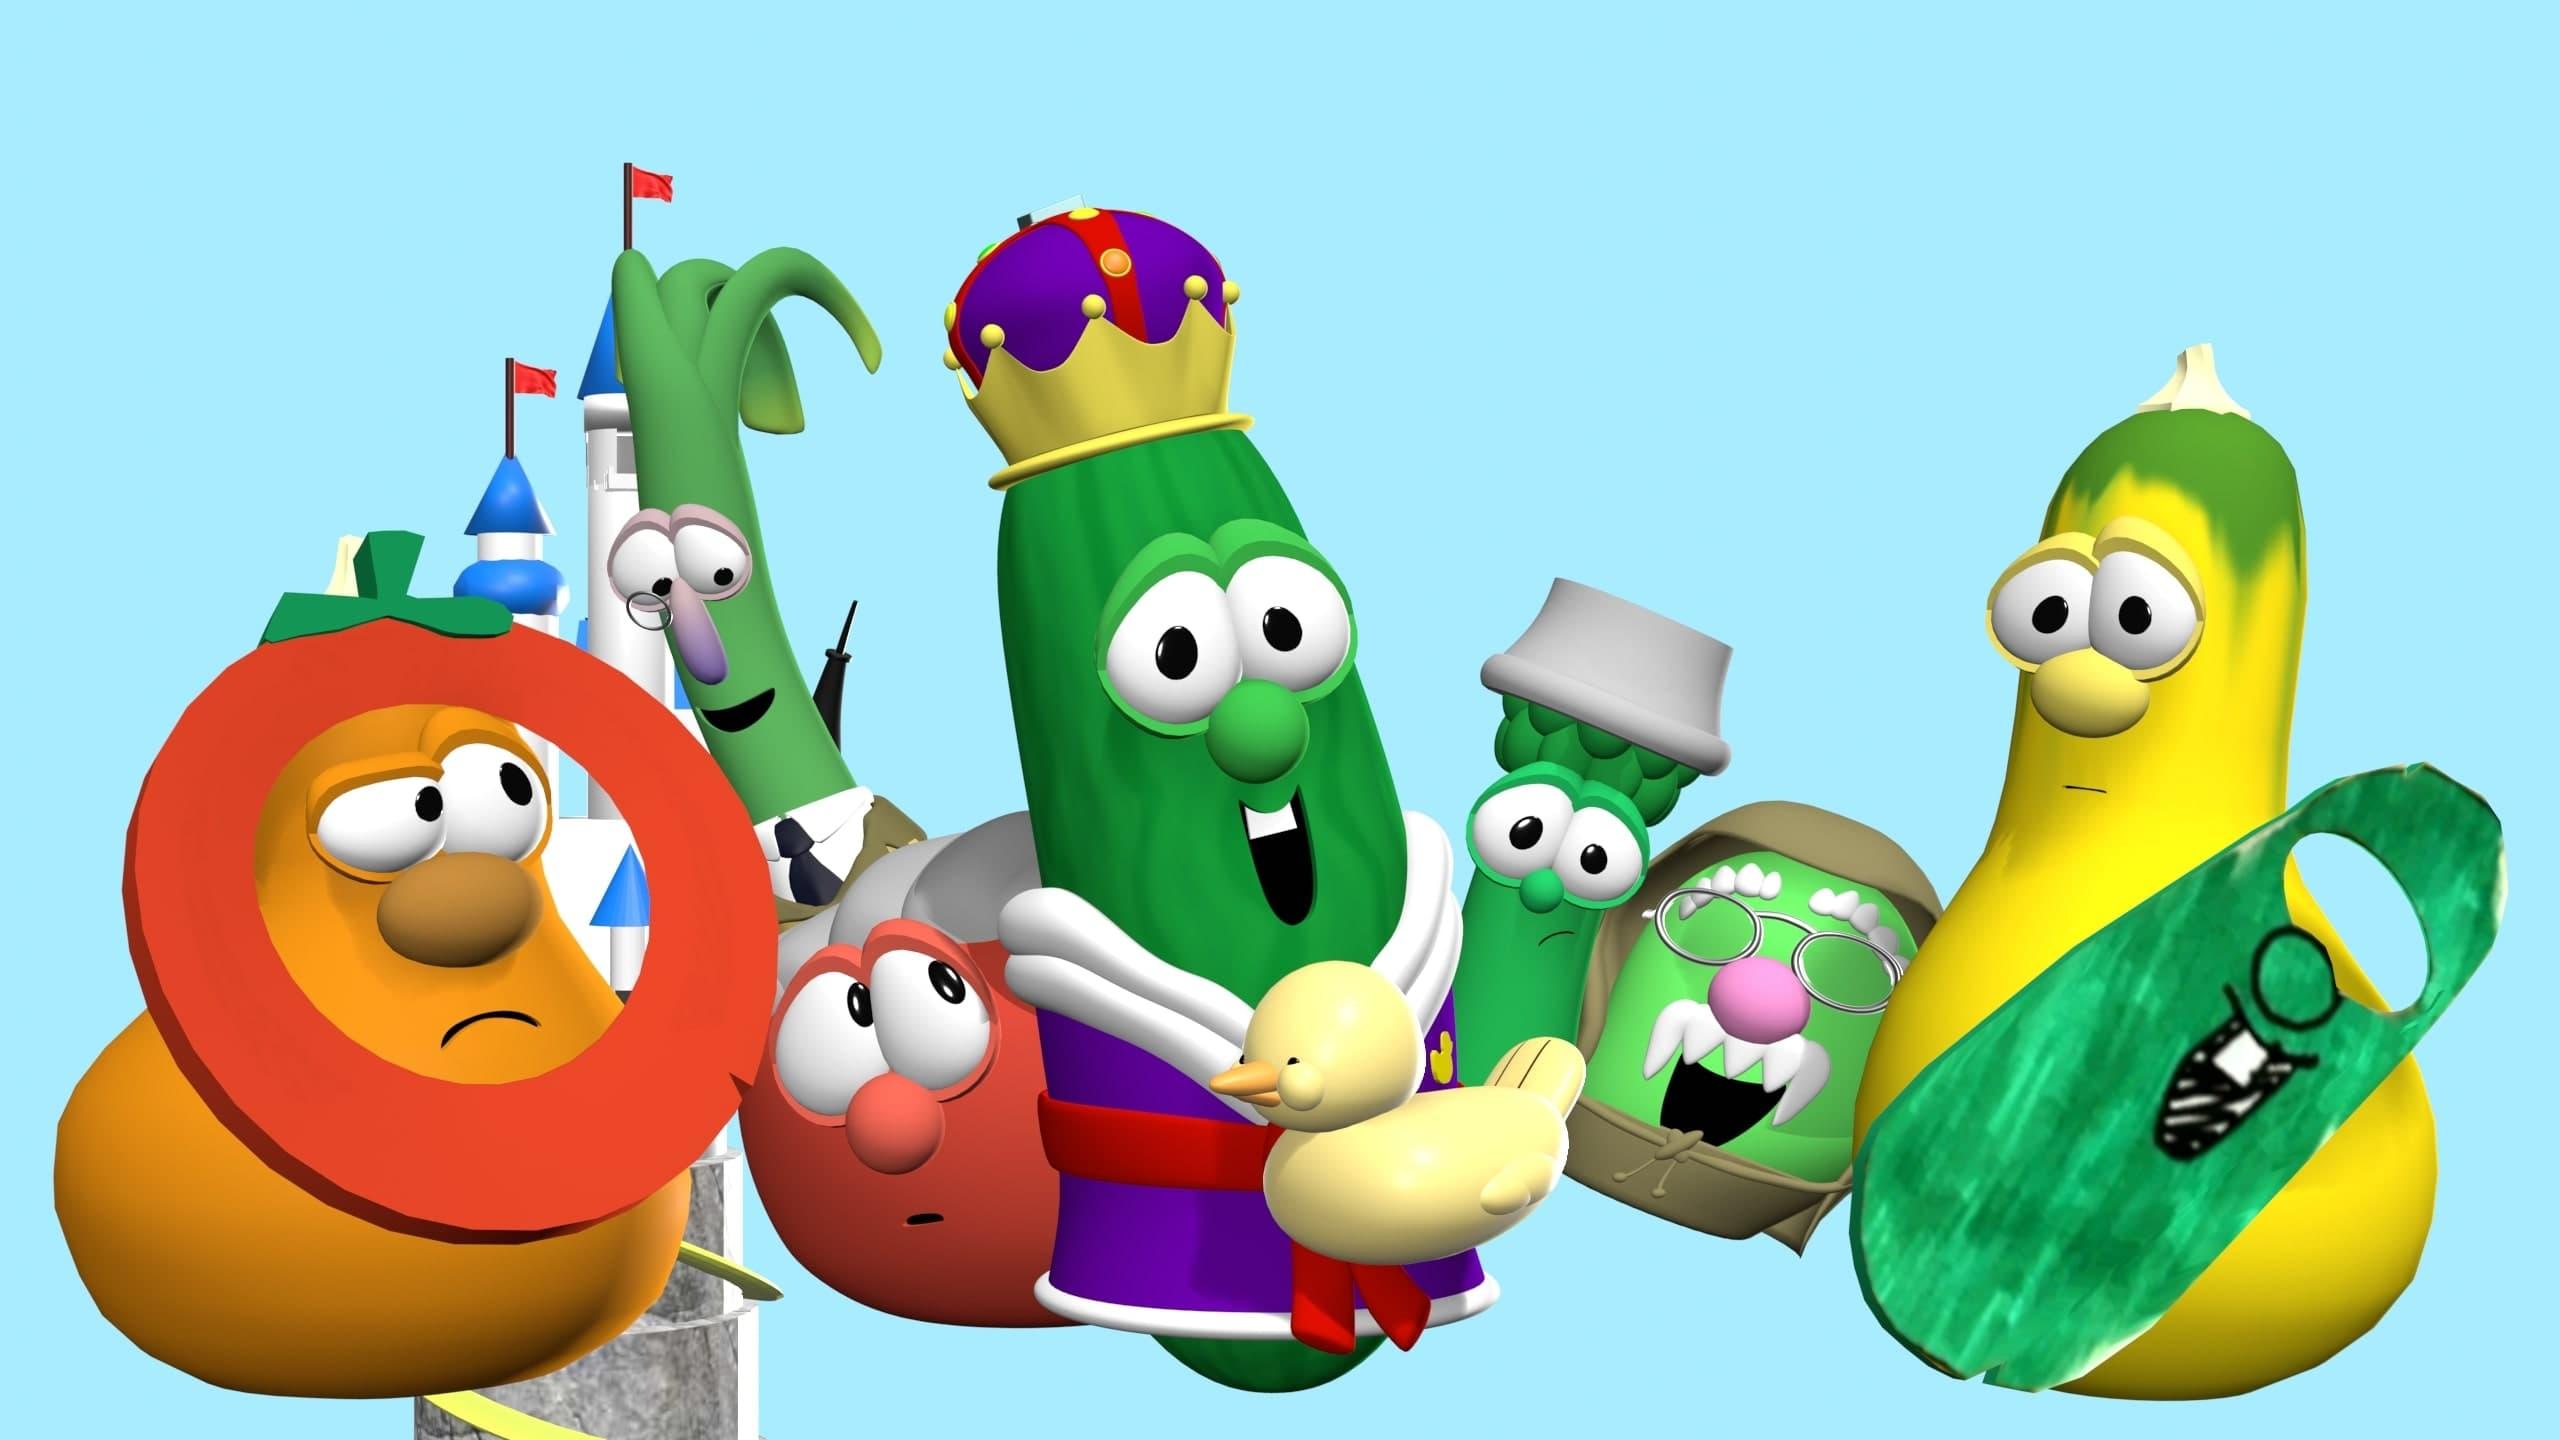 VeggieTales: King George and the Ducky backdrop